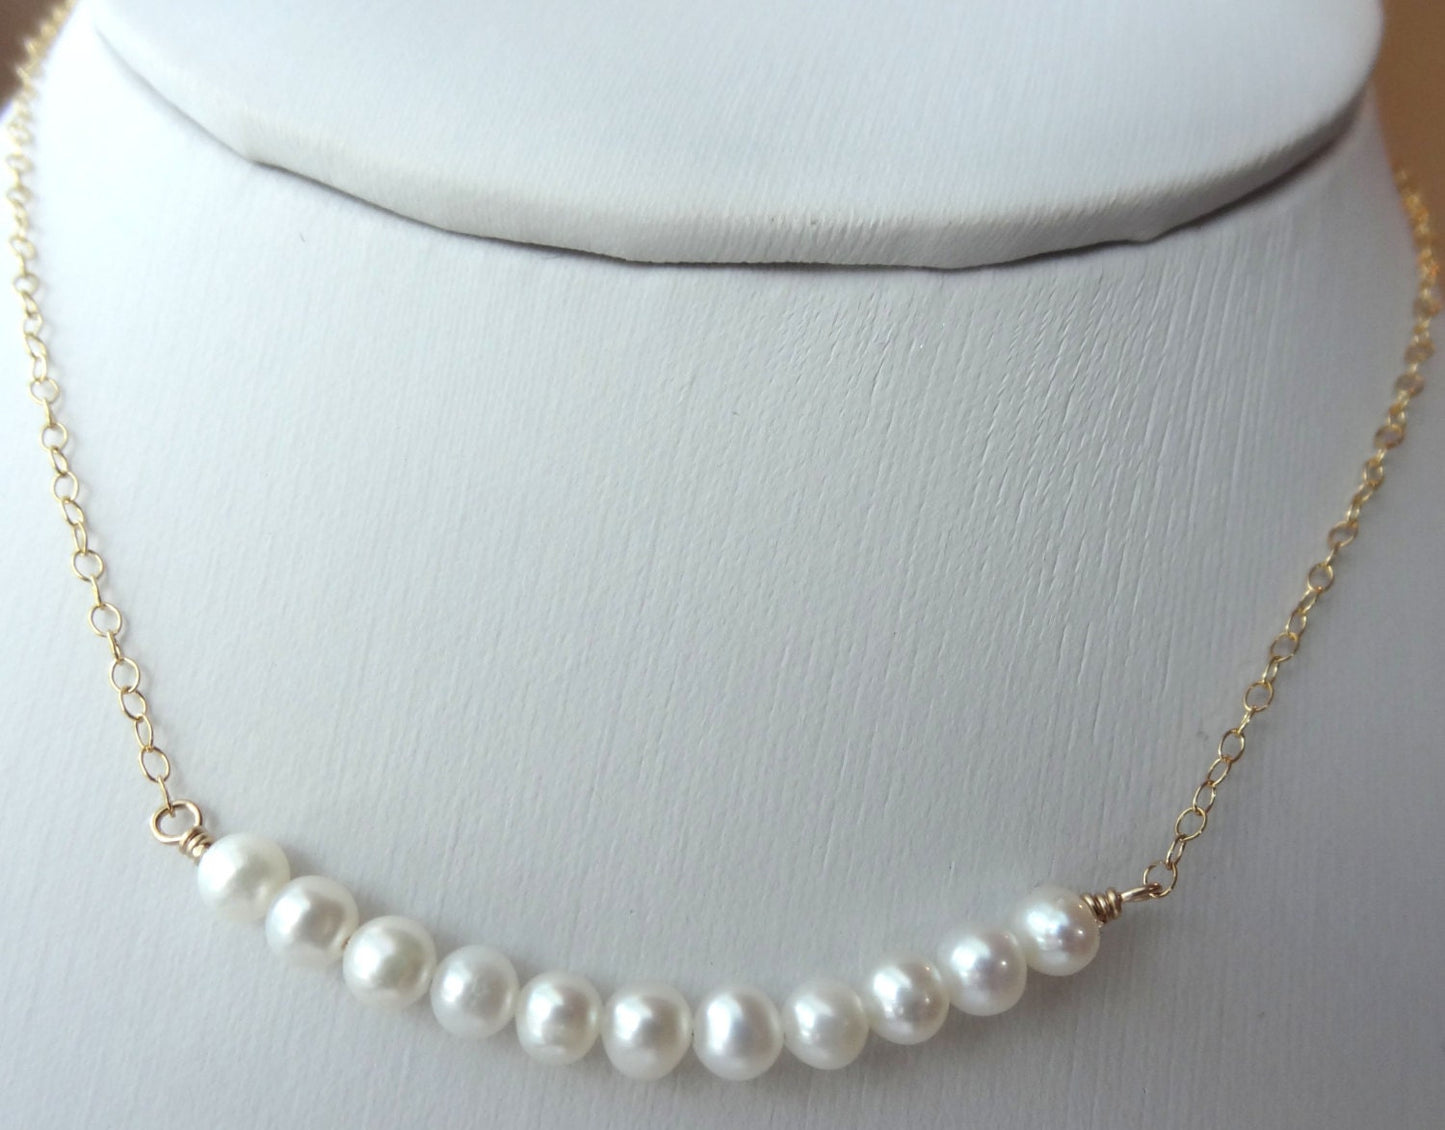 In a Row Freshwater Pearl Gold Necklace,Minimalist Bar Pearl Necklace